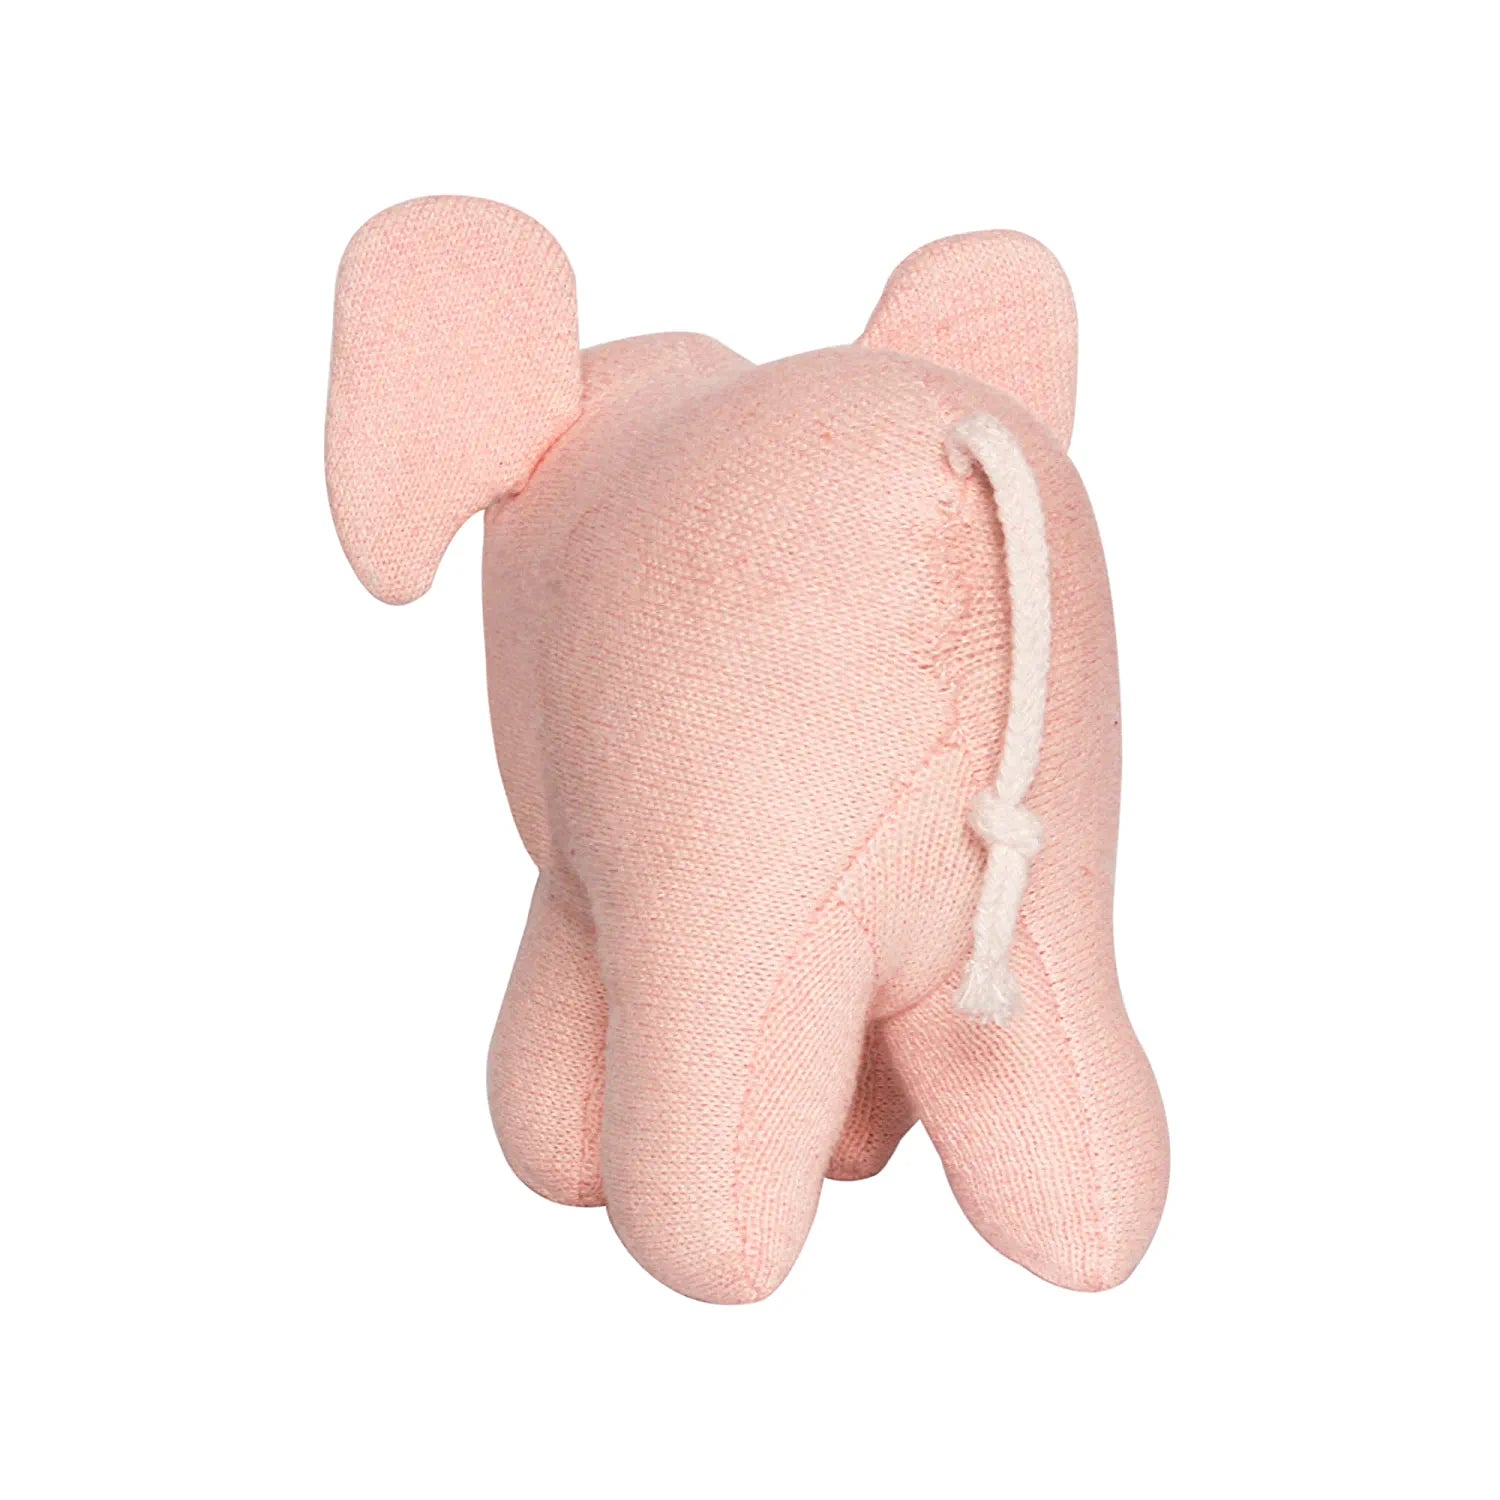 Pink Elephant Soft Toy for Boys & Girls Soft Huggable Birthday Gift for Baby (pink)